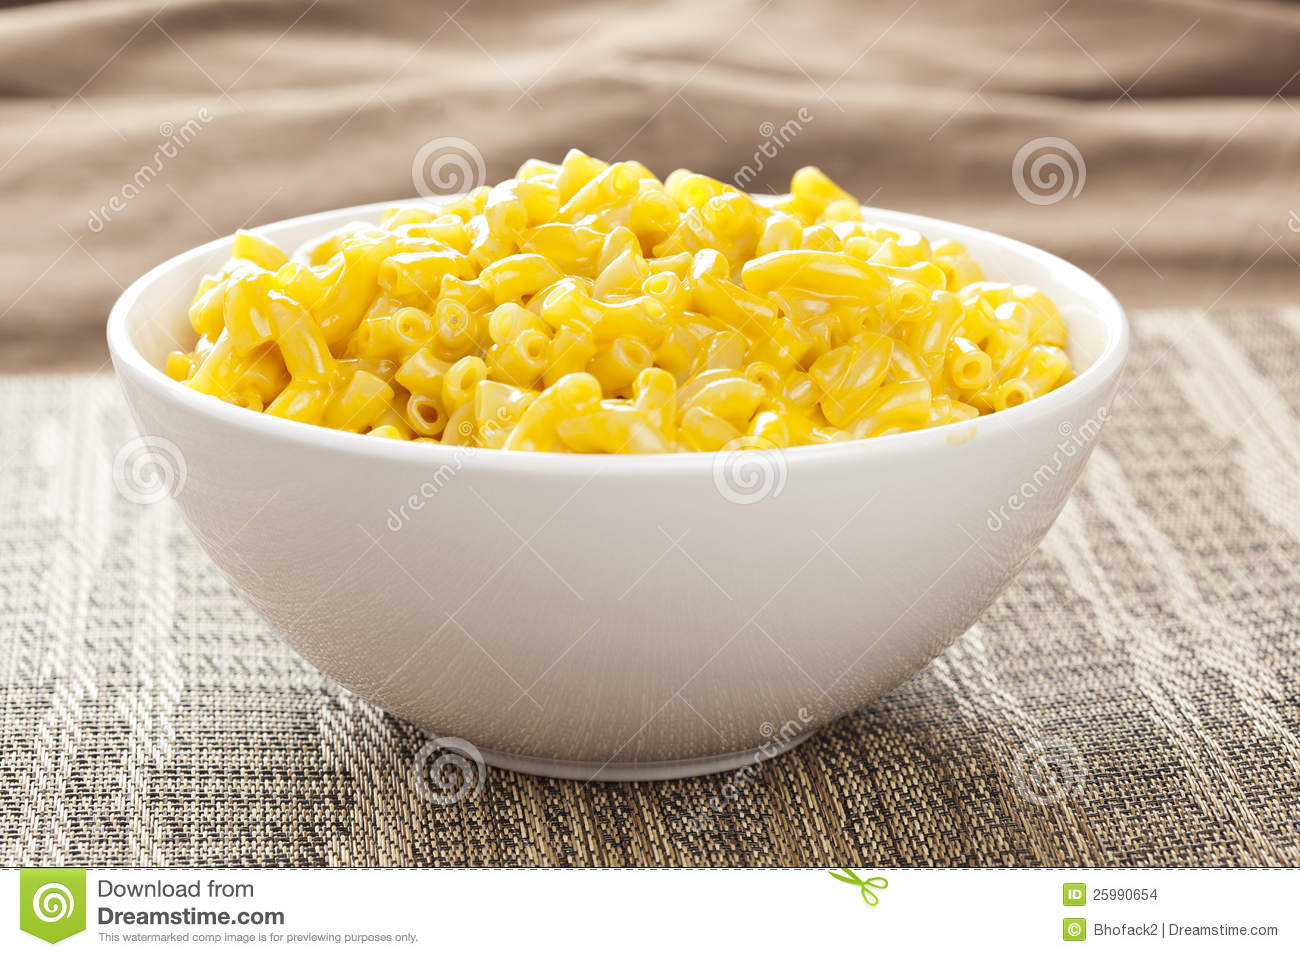 Macaroni And Cheese In A Bowl Stock Images   Image  25990654